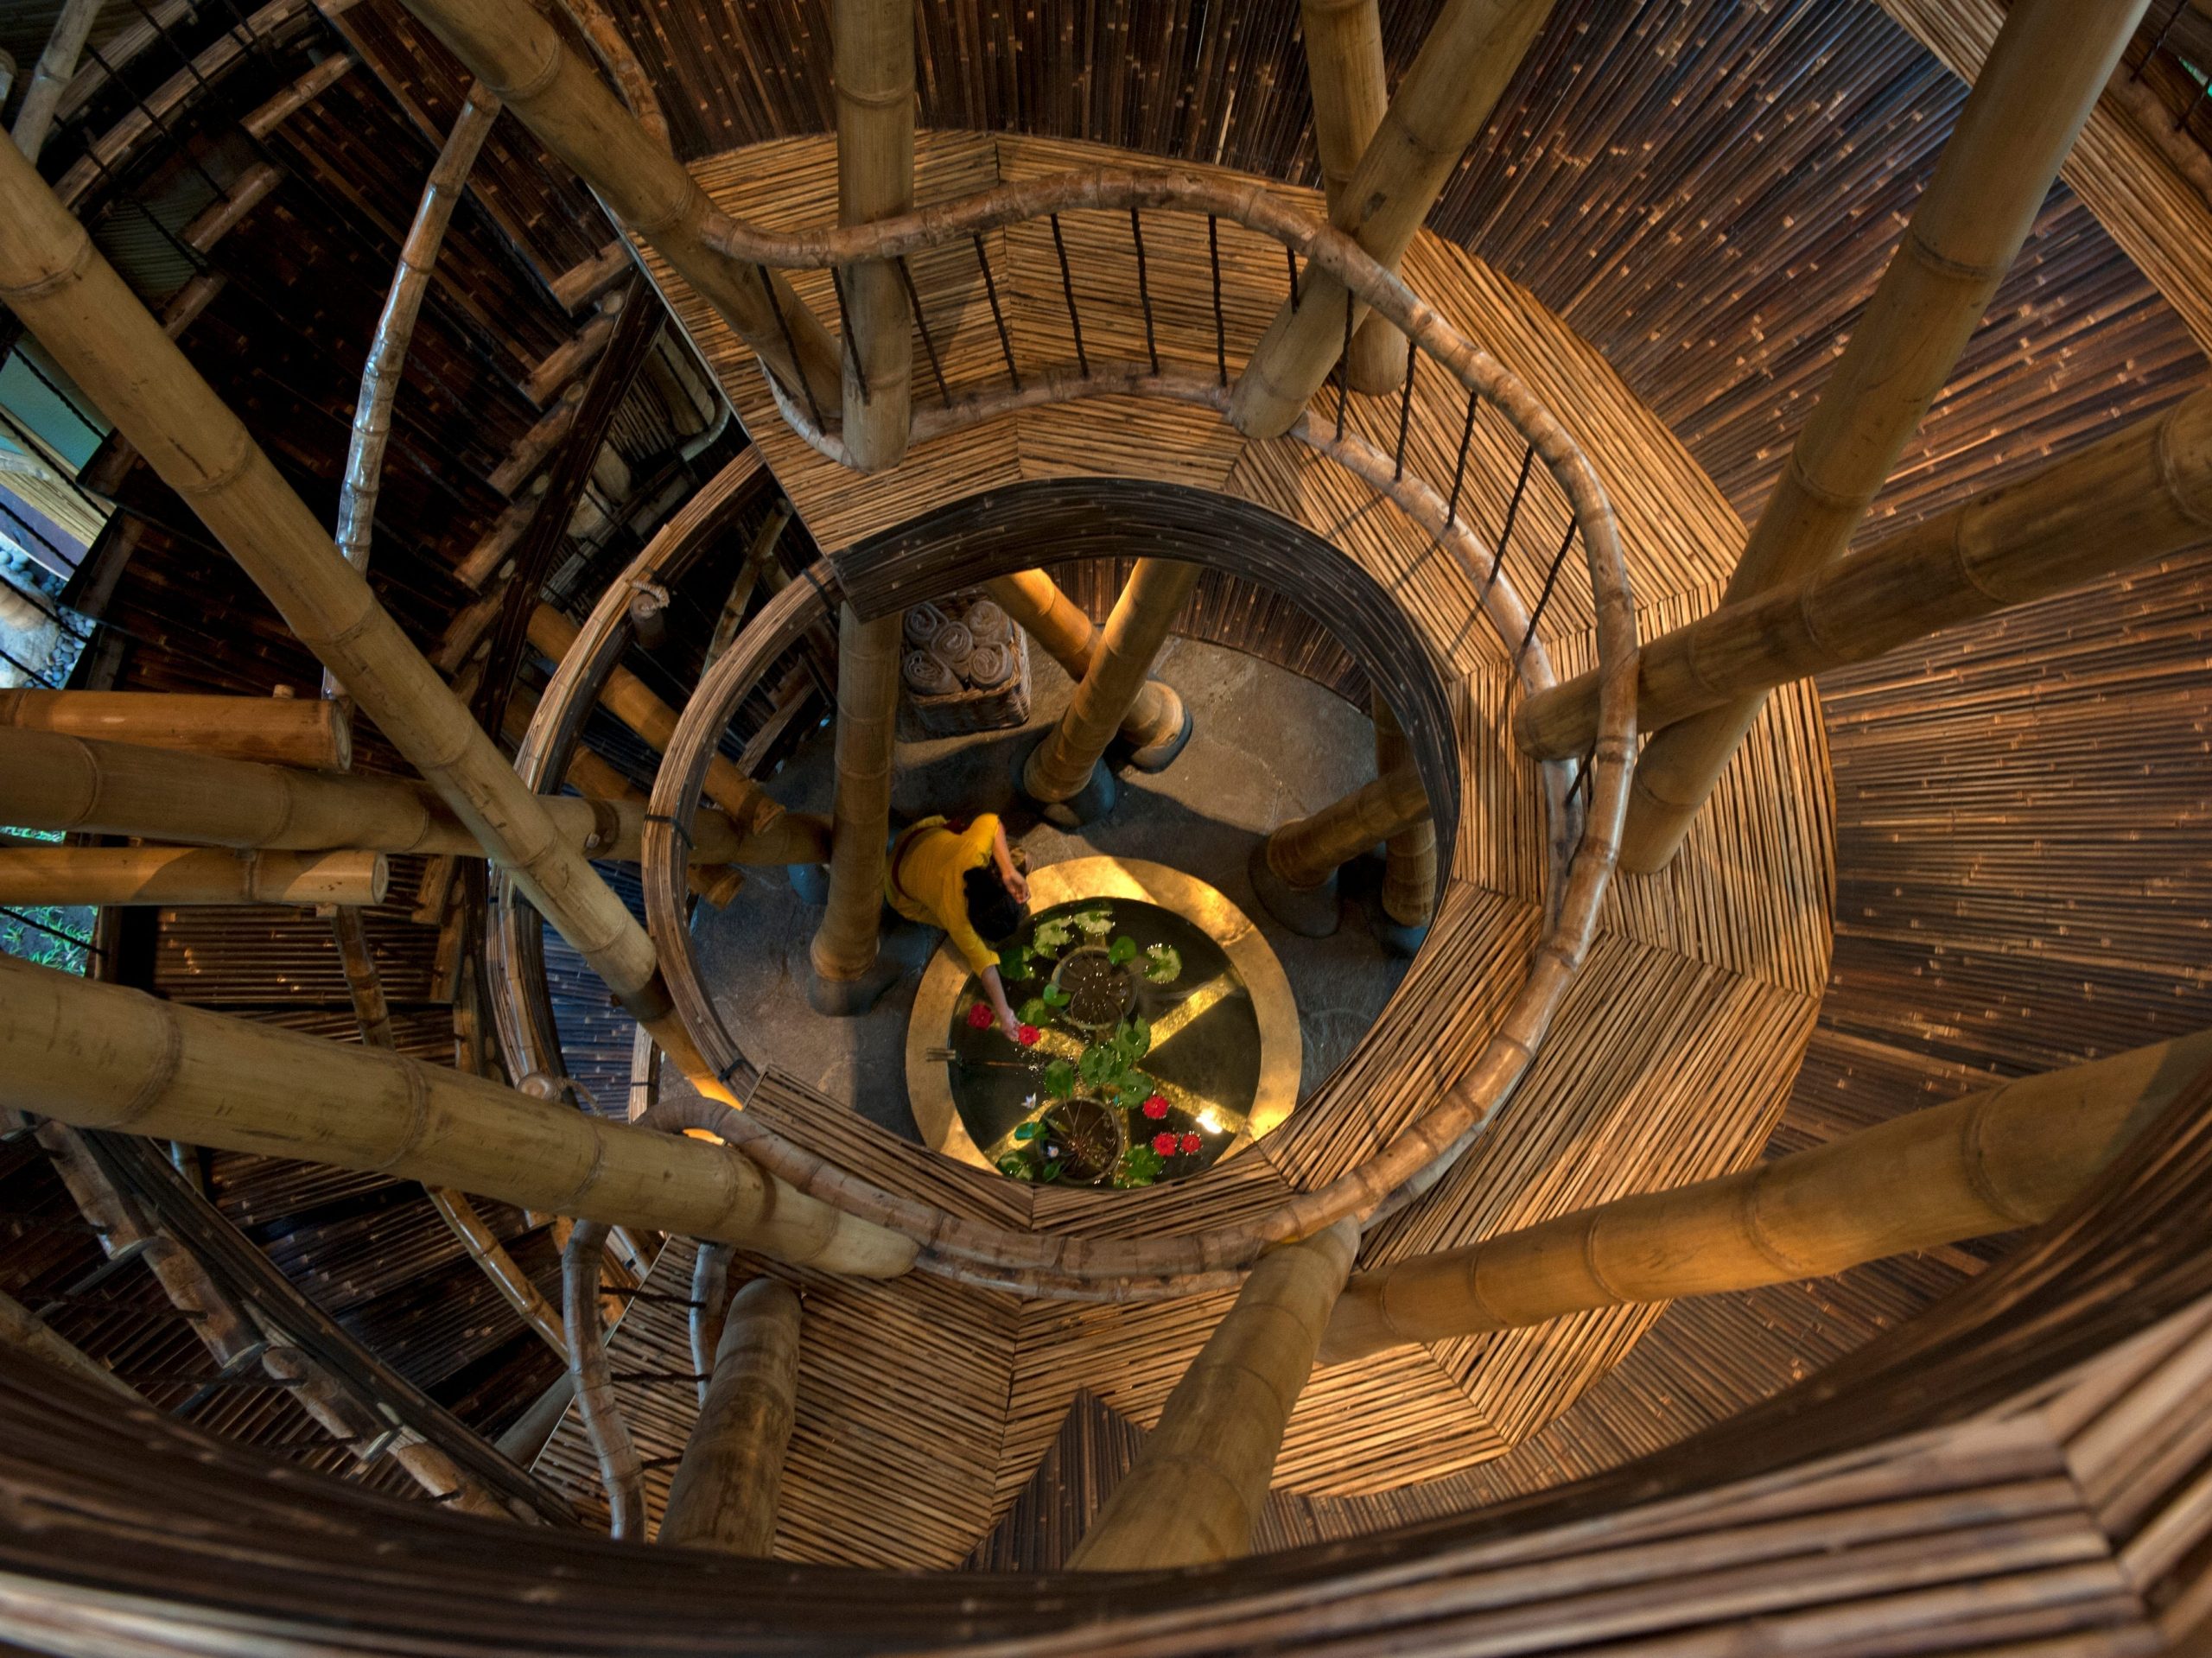 The staircase of the home winds up through the center of the structure